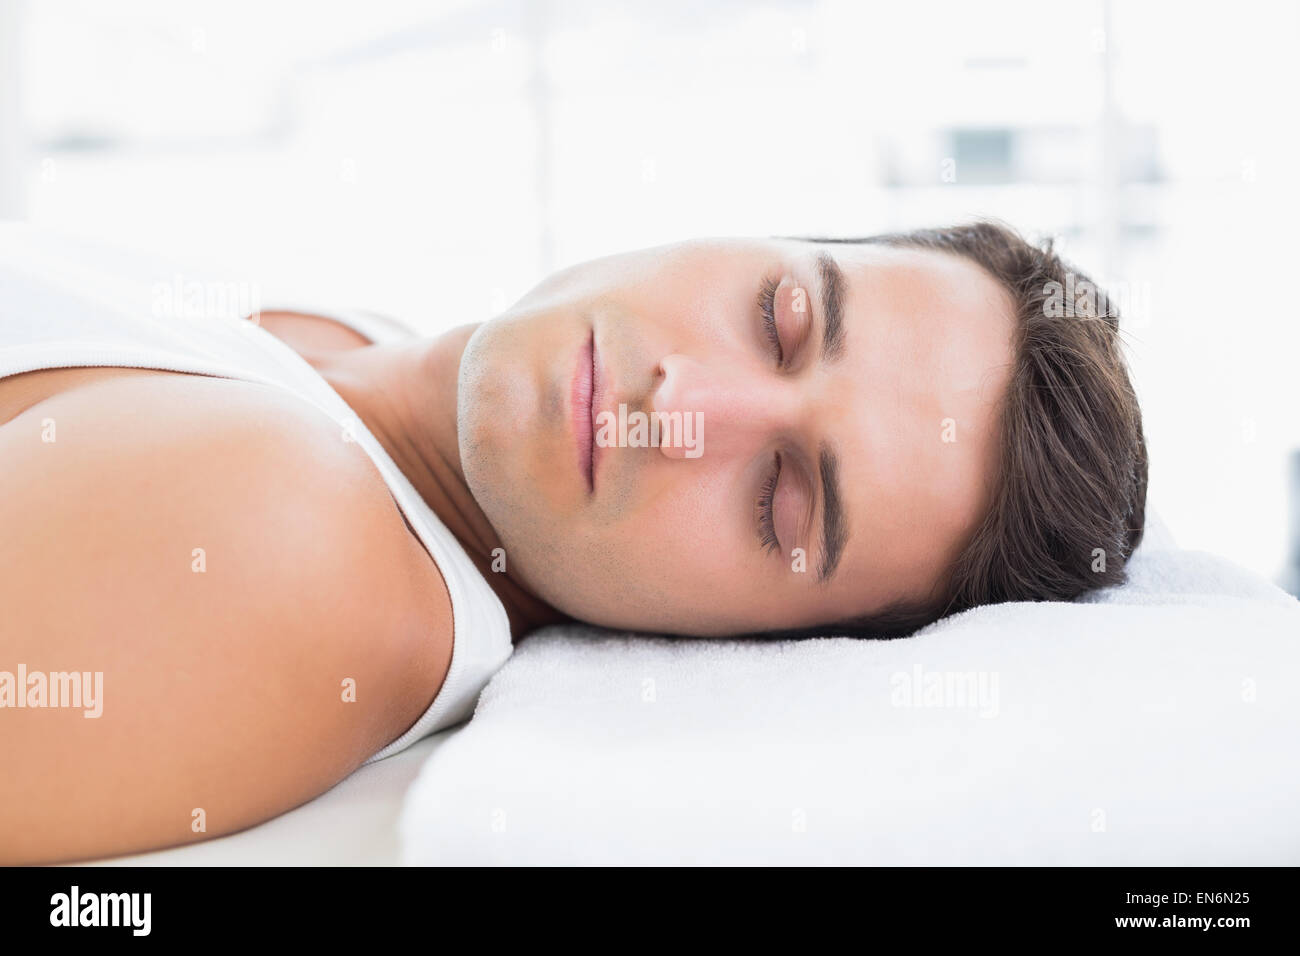 Man relaxing on massage table Banque D'Images